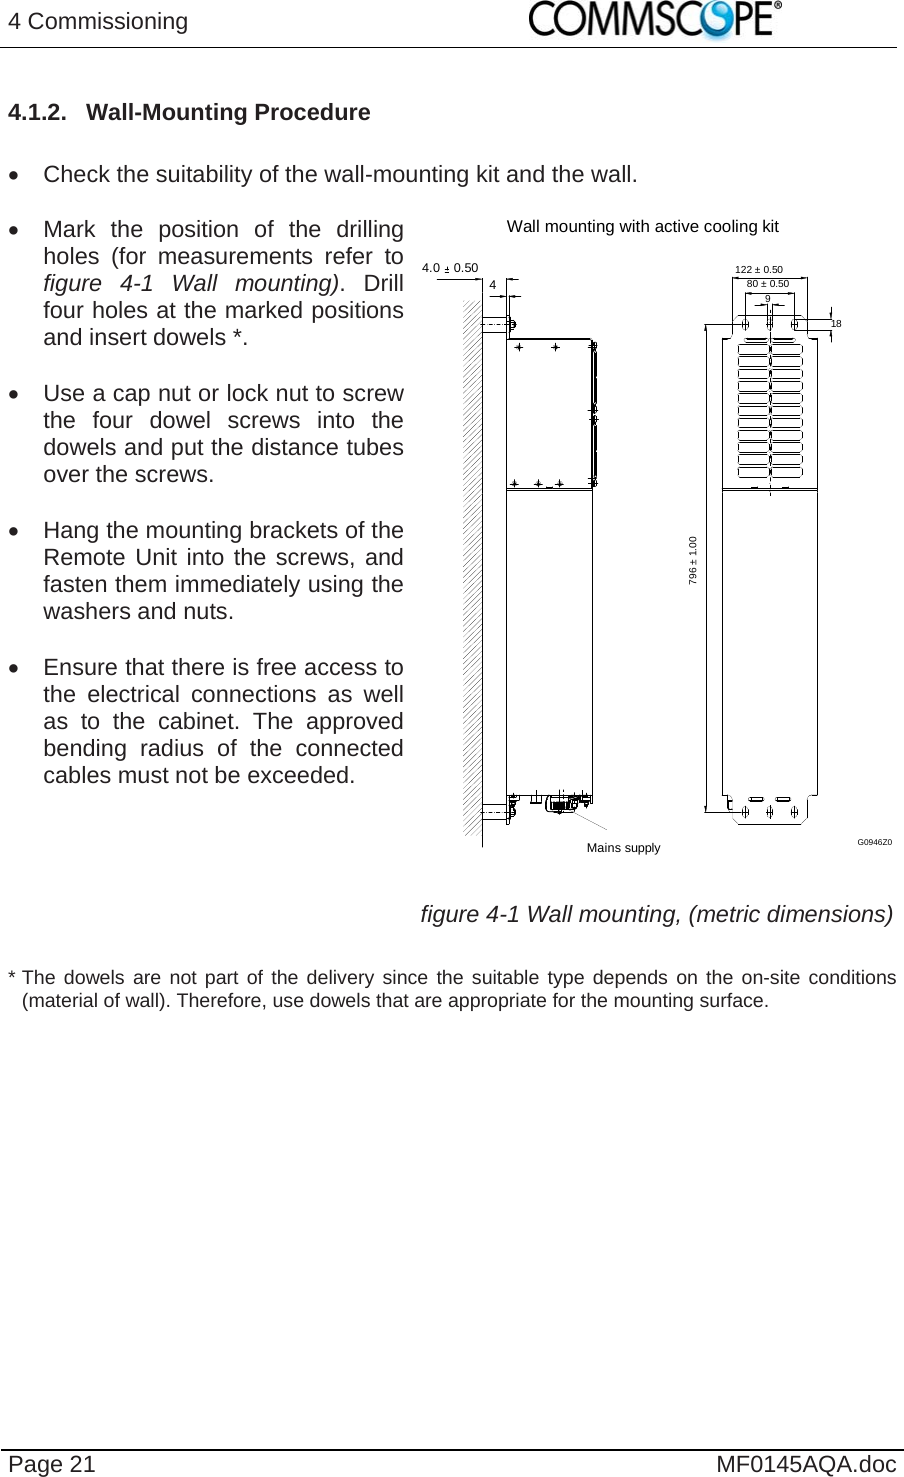 4 Commissioning    Page 21  MF0145AQA.doc 4.1.2. Wall-Mounting Procedure    Check the suitability of the wall-mounting kit and the wall.    Mark the position of the drilling holes (for measurements refer to figure 4-1 Wall mounting). Drill four holes at the marked positions and insert dowels *.    Use a cap nut or lock nut to screw the four dowel screws into the dowels and put the distance tubes over the screws.    Hang the mounting brackets of the Remote Unit into the screws, and fasten them immediately using the washers and nuts.    Ensure that there is free access to the electrical connections as well as to the cabinet. The approved bending radius of the connected cables must not be exceeded.   Wall mounting with active cooling kit4.0  0.504Mains supply980 ± 0.50122 ± 0.5018796 ± 1.00G0946Z0 figure 4-1 Wall mounting, (metric dimensions) * The dowels are not part of the delivery since the suitable type depends on the on-site conditions (material of wall). Therefore, use dowels that are appropriate for the mounting surface.  